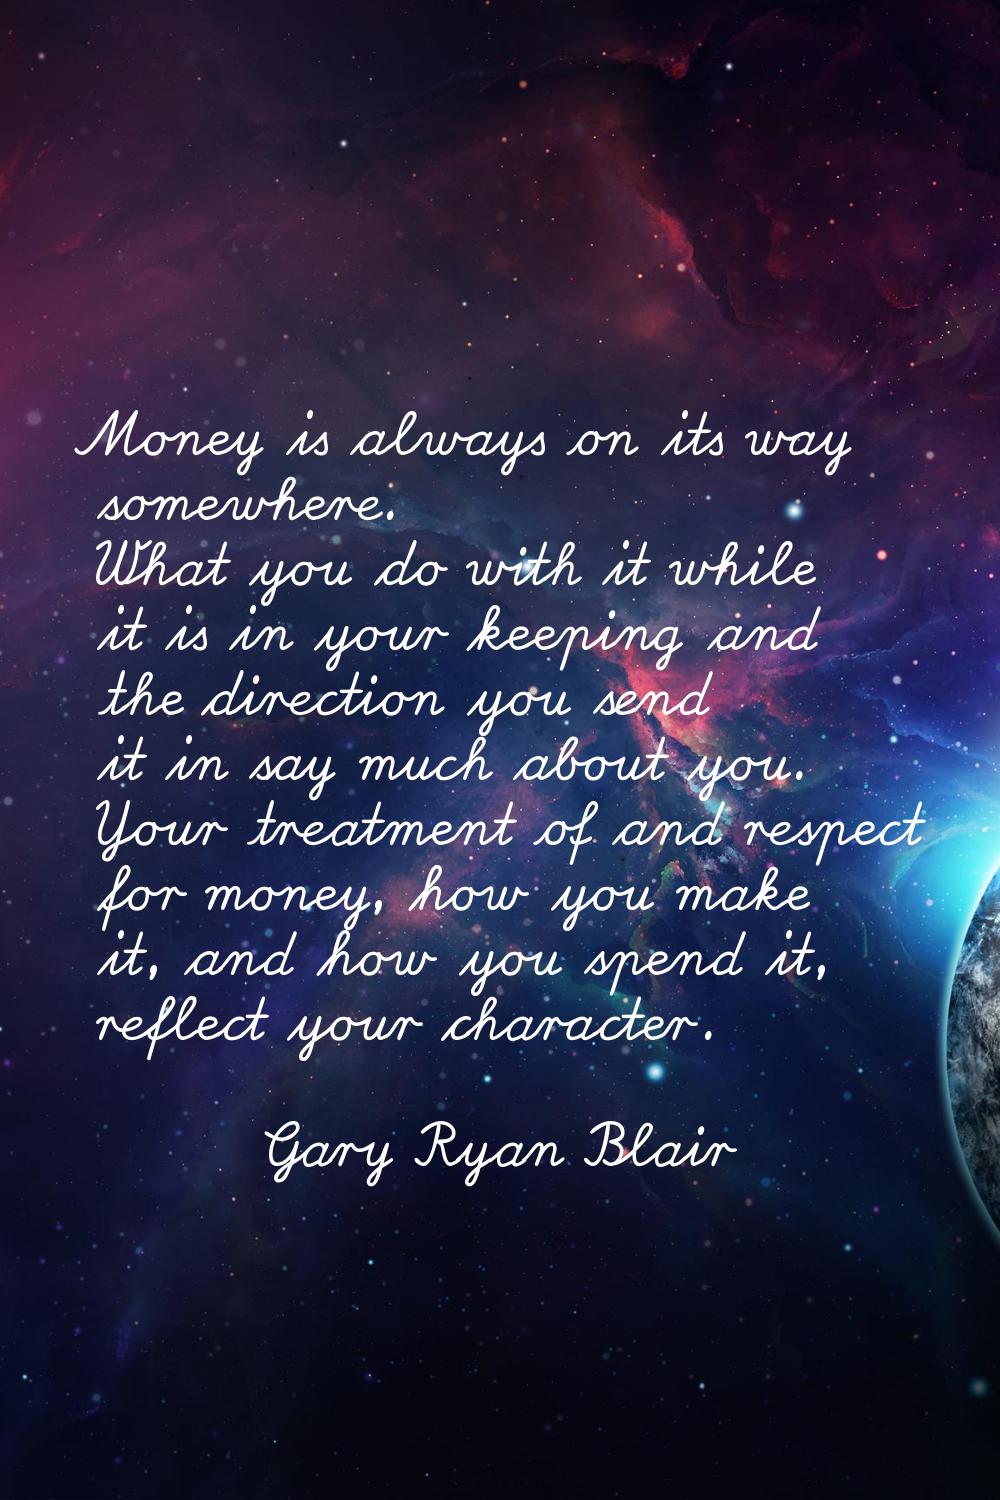 Money is always on its way somewhere. What you do with it while it is in your keeping and the direc